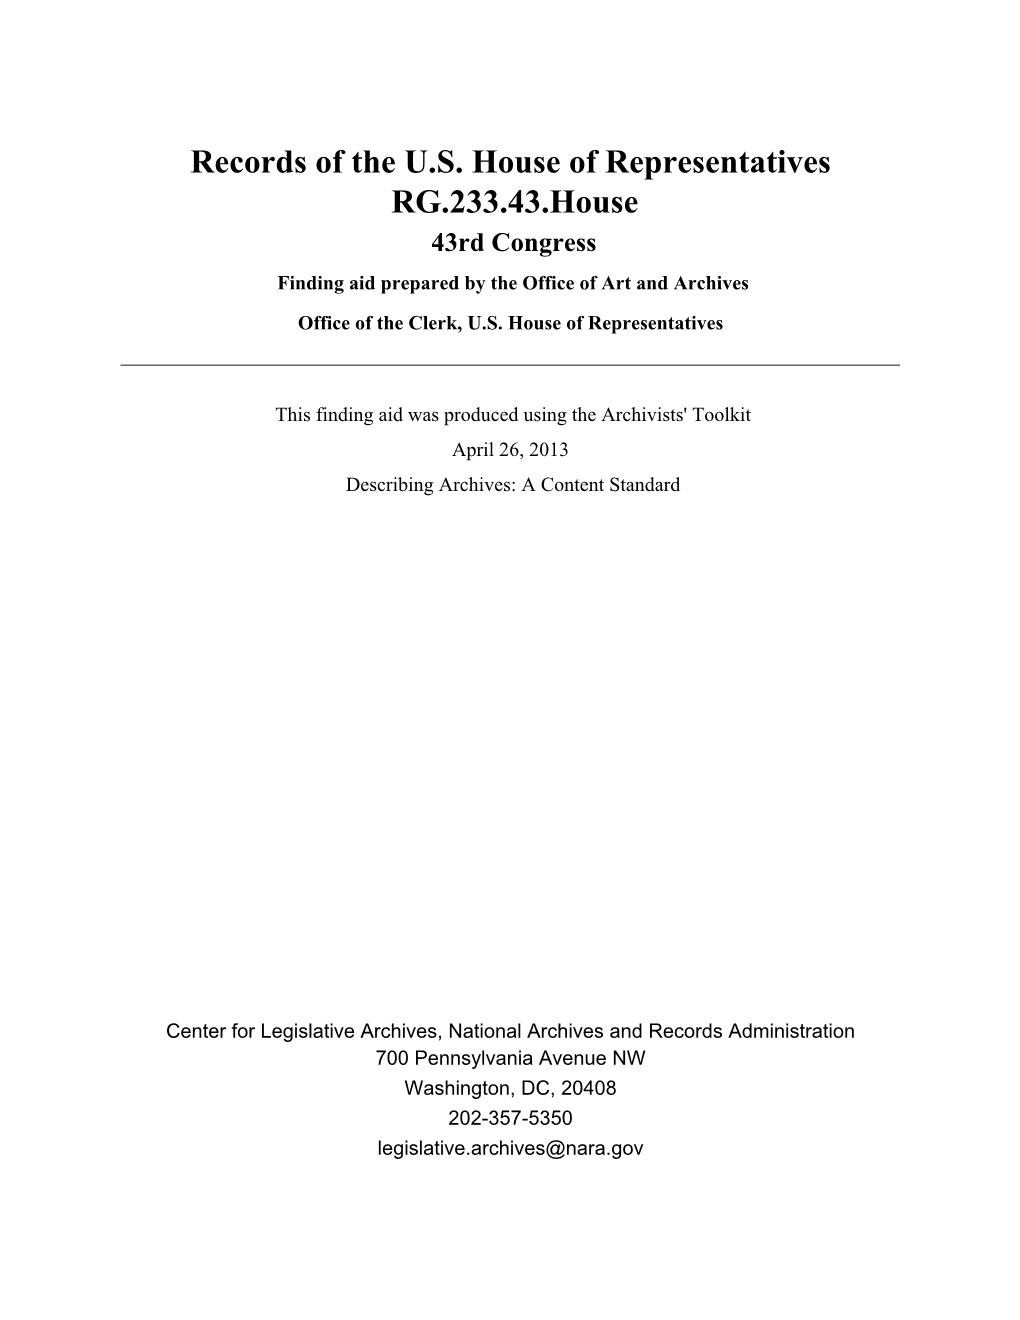 Records of the U.S. House of Representatives RG.233.43.House 43Rd Congress Finding Aid Prepared by the Office of Art and Archives